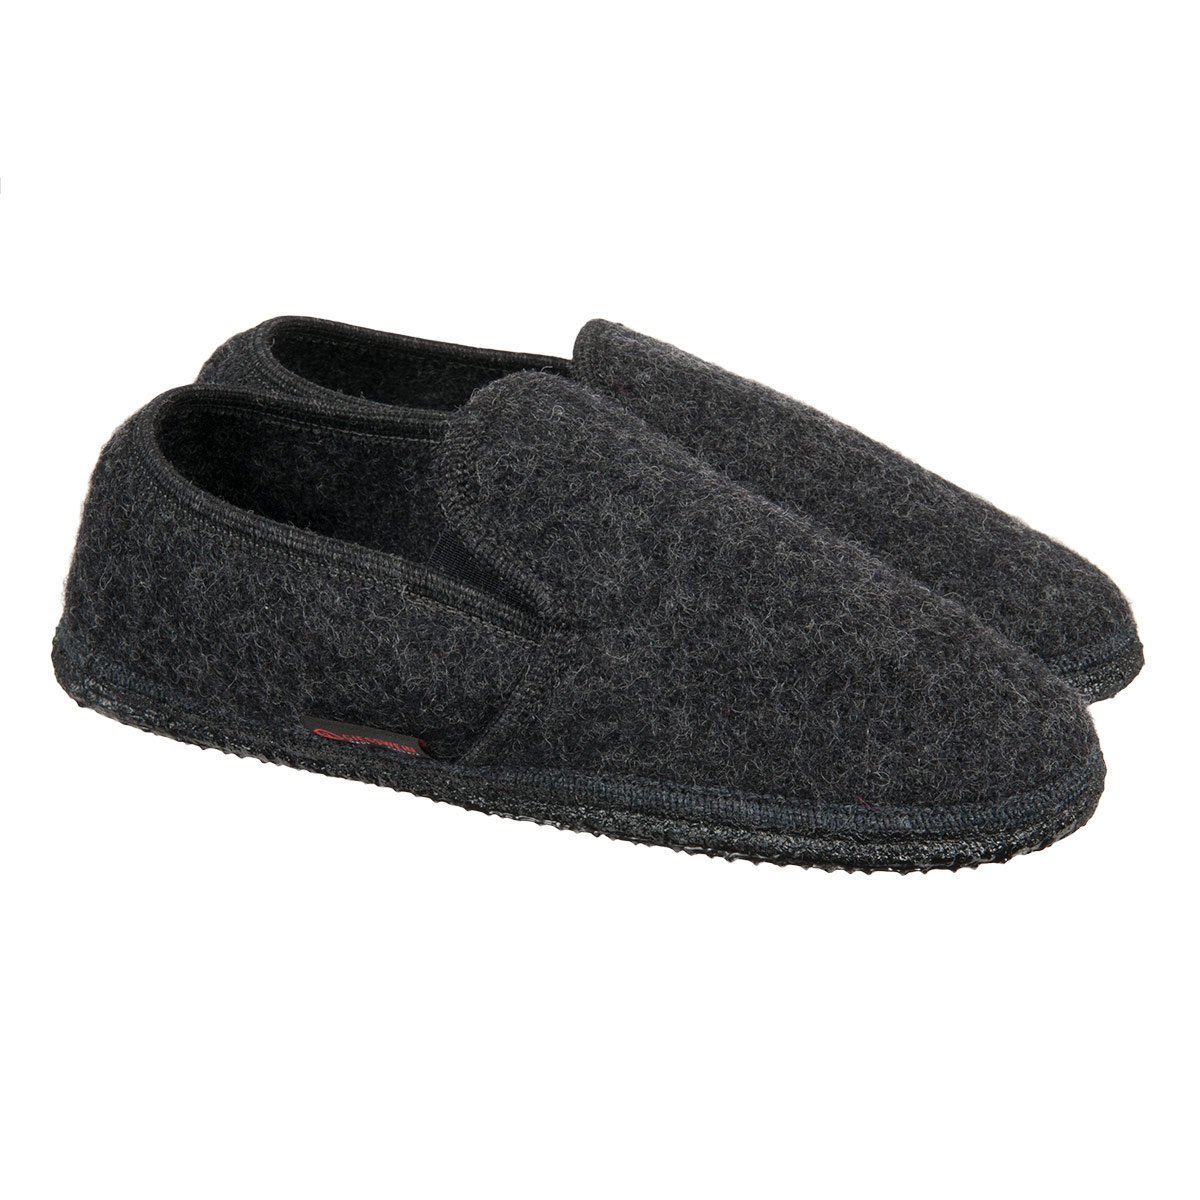 slippers with non-slip soles model 